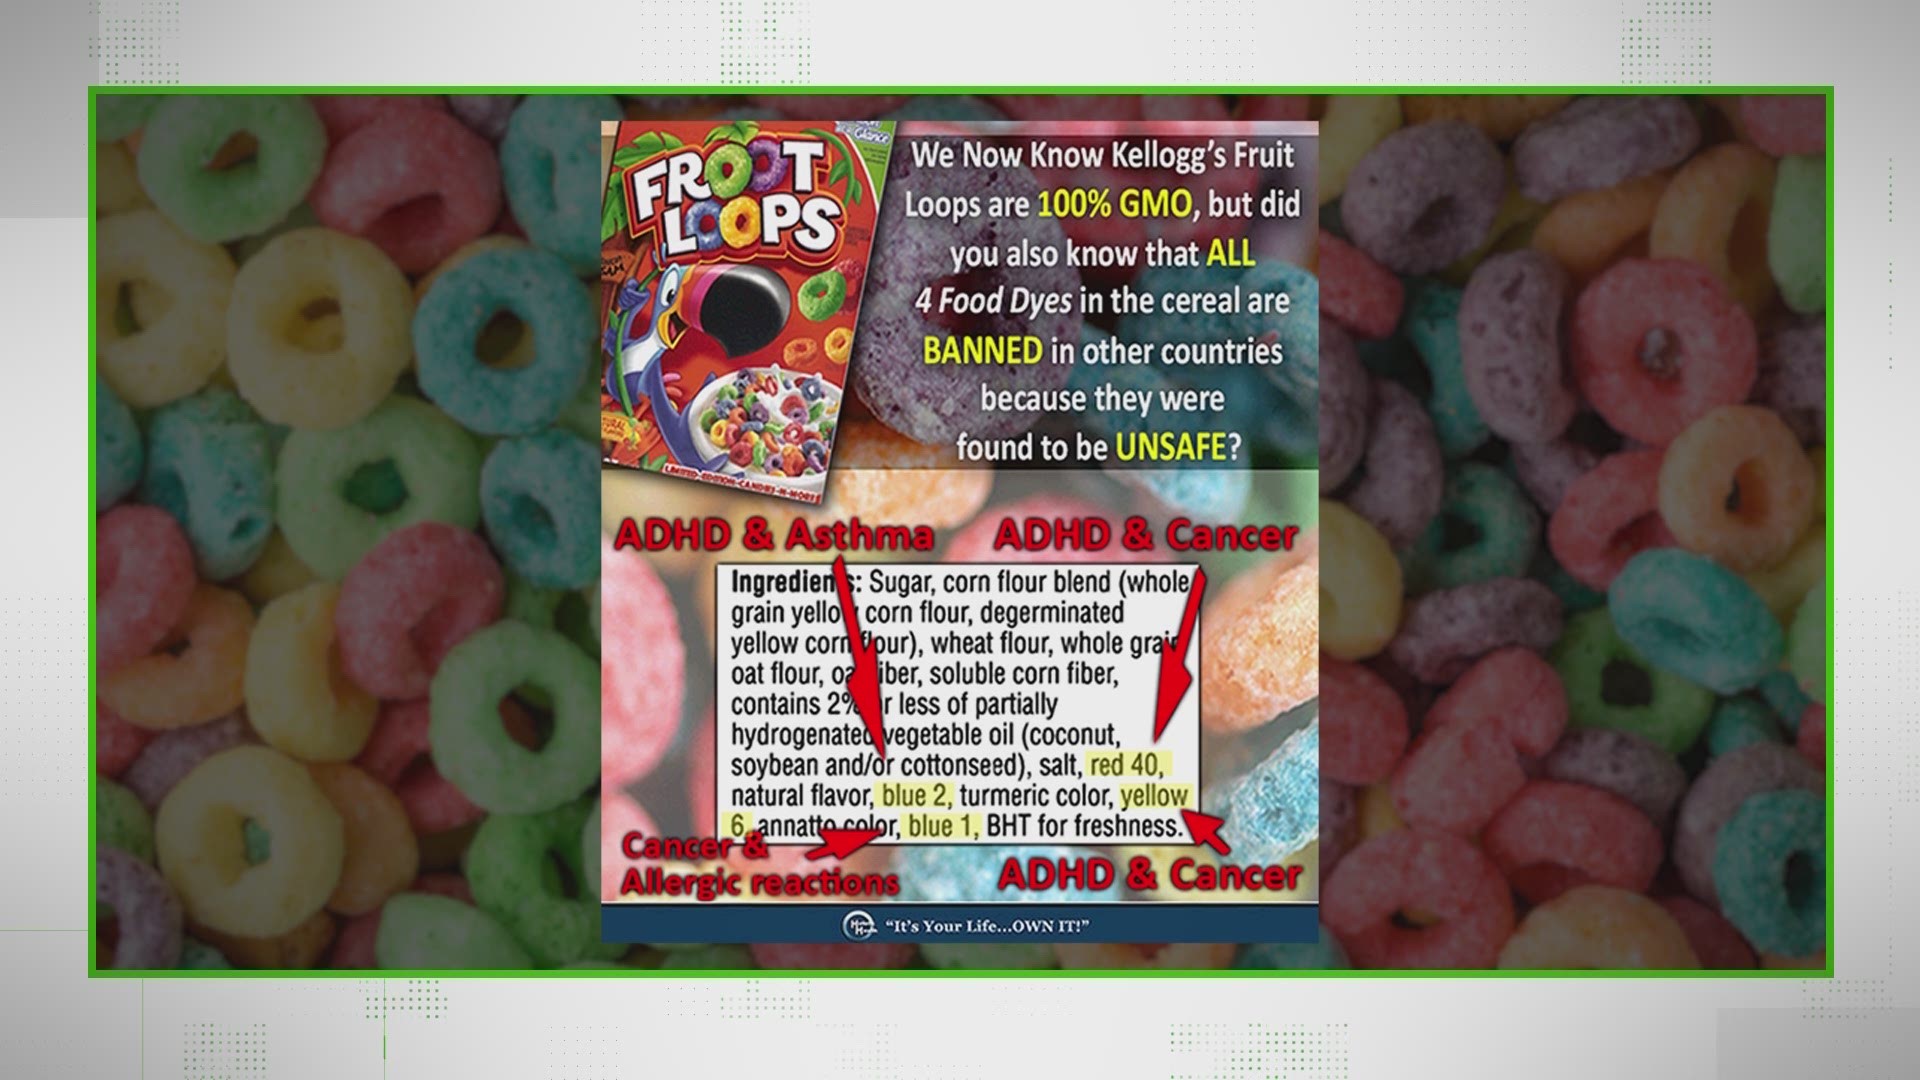 VERIFY: No, Froot Loops dyes haven't been linked to cancer or